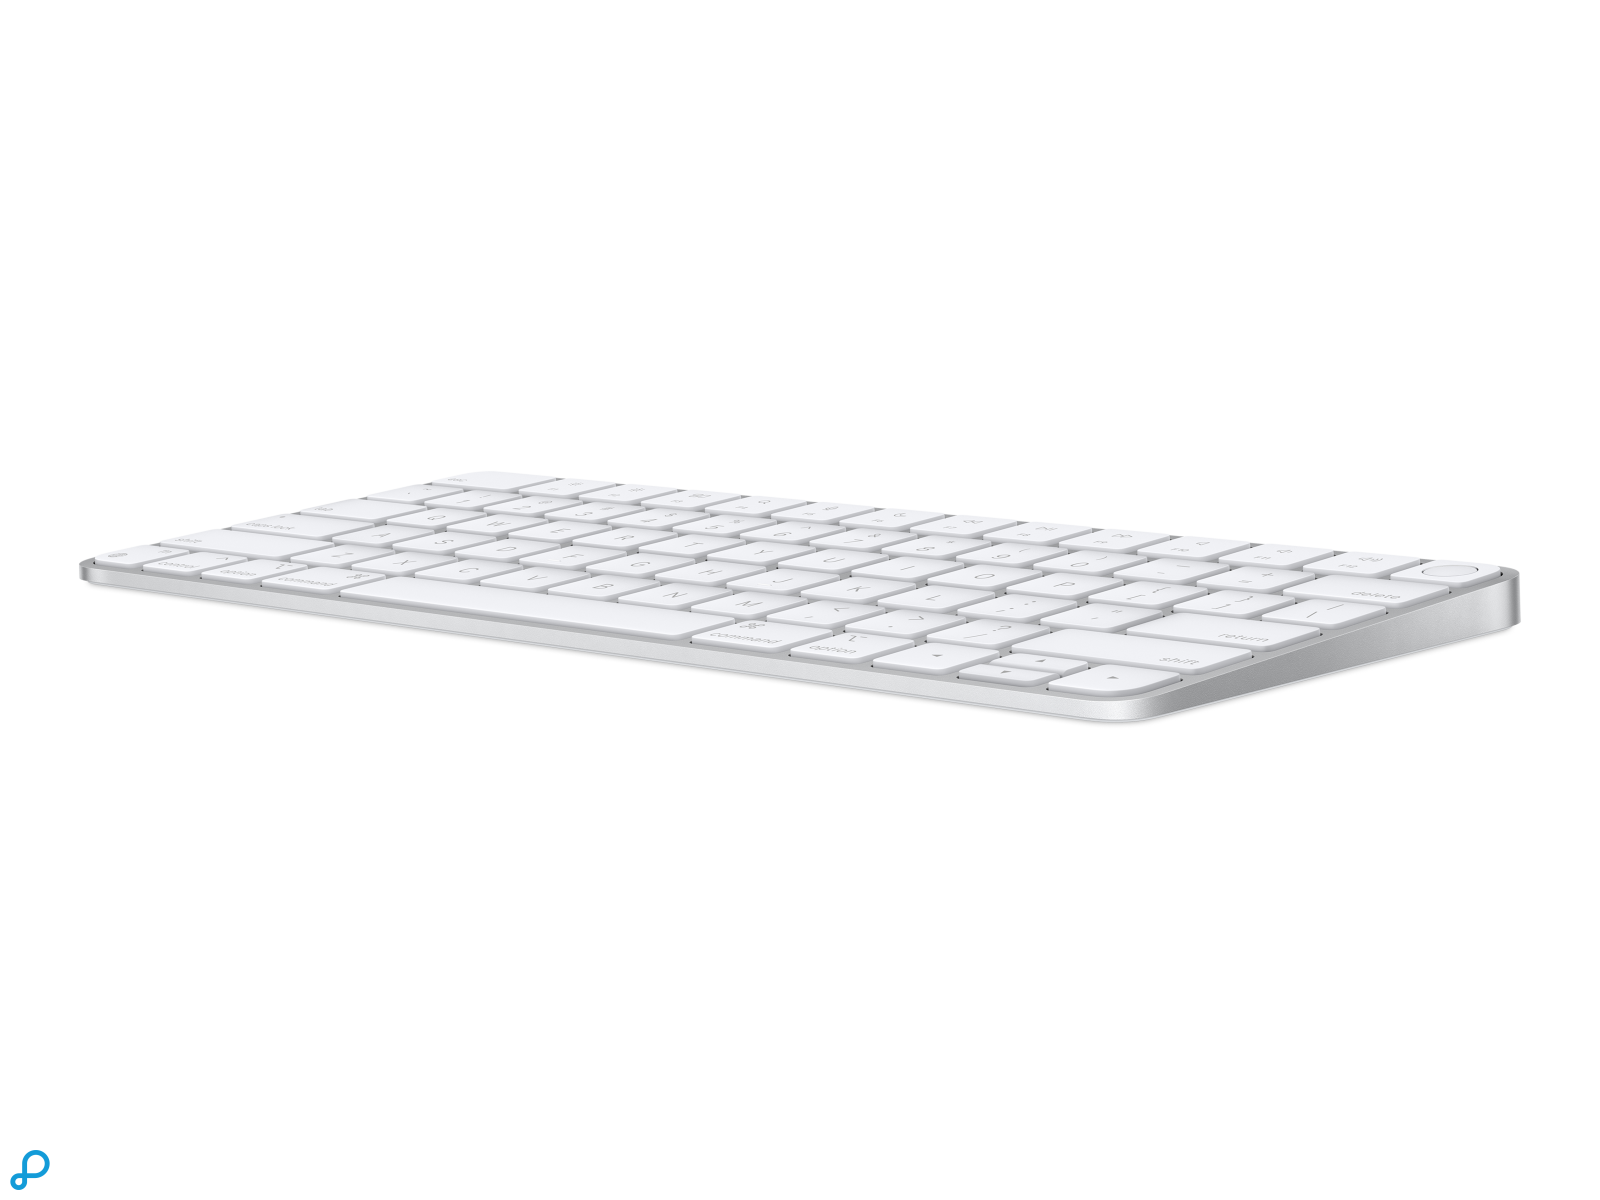 Magic Keyboard with Touch ID for Mac computers with Apple silicon - US English-1